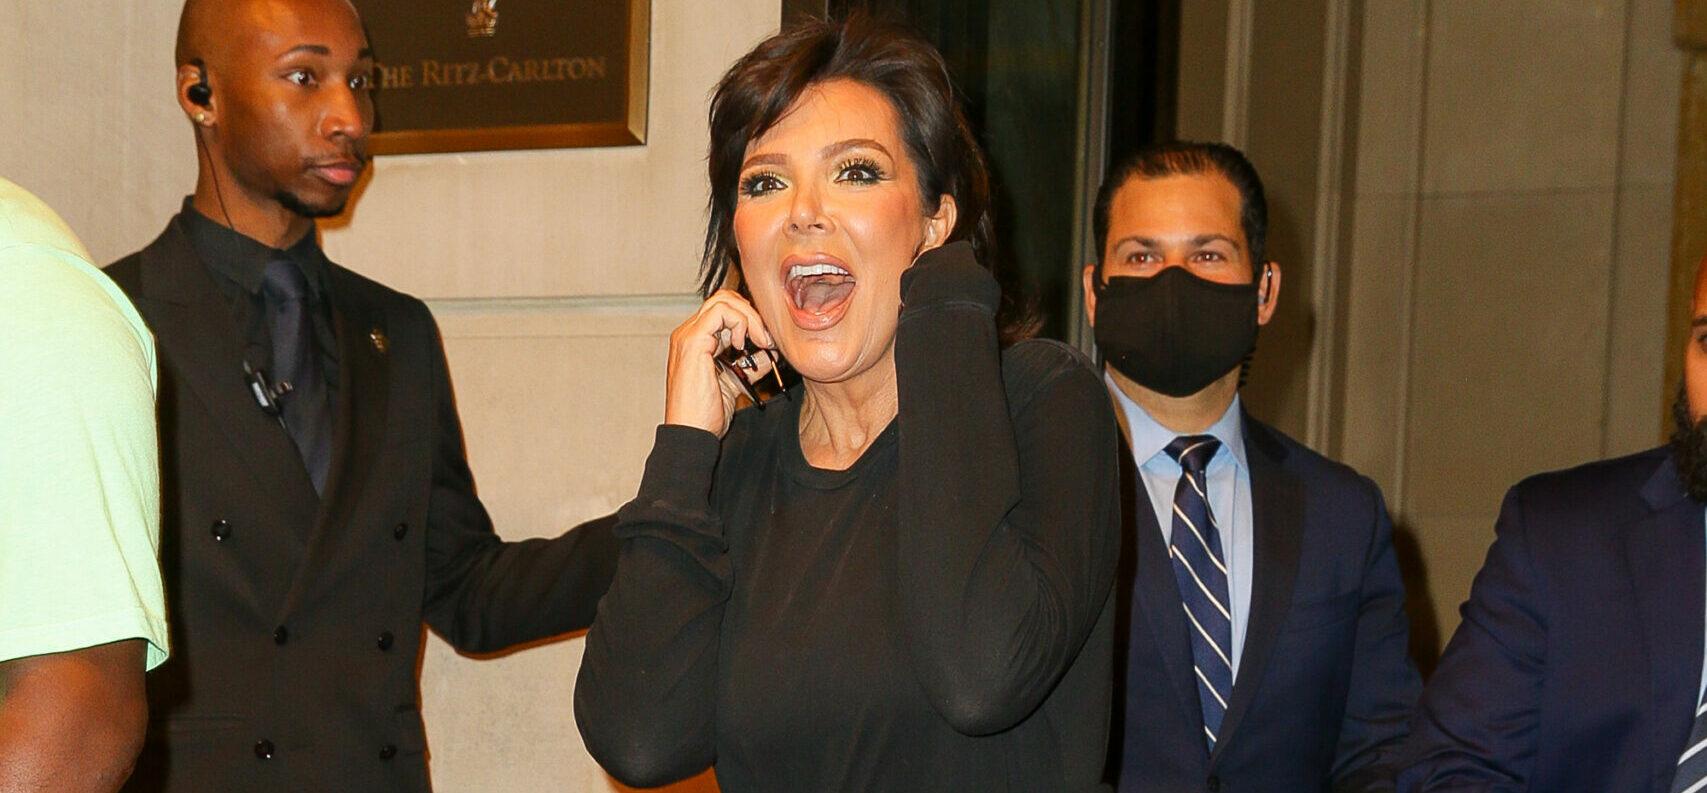 Kris Jenner Is Ecstatic Blac Chyna LOST Defamation Case!